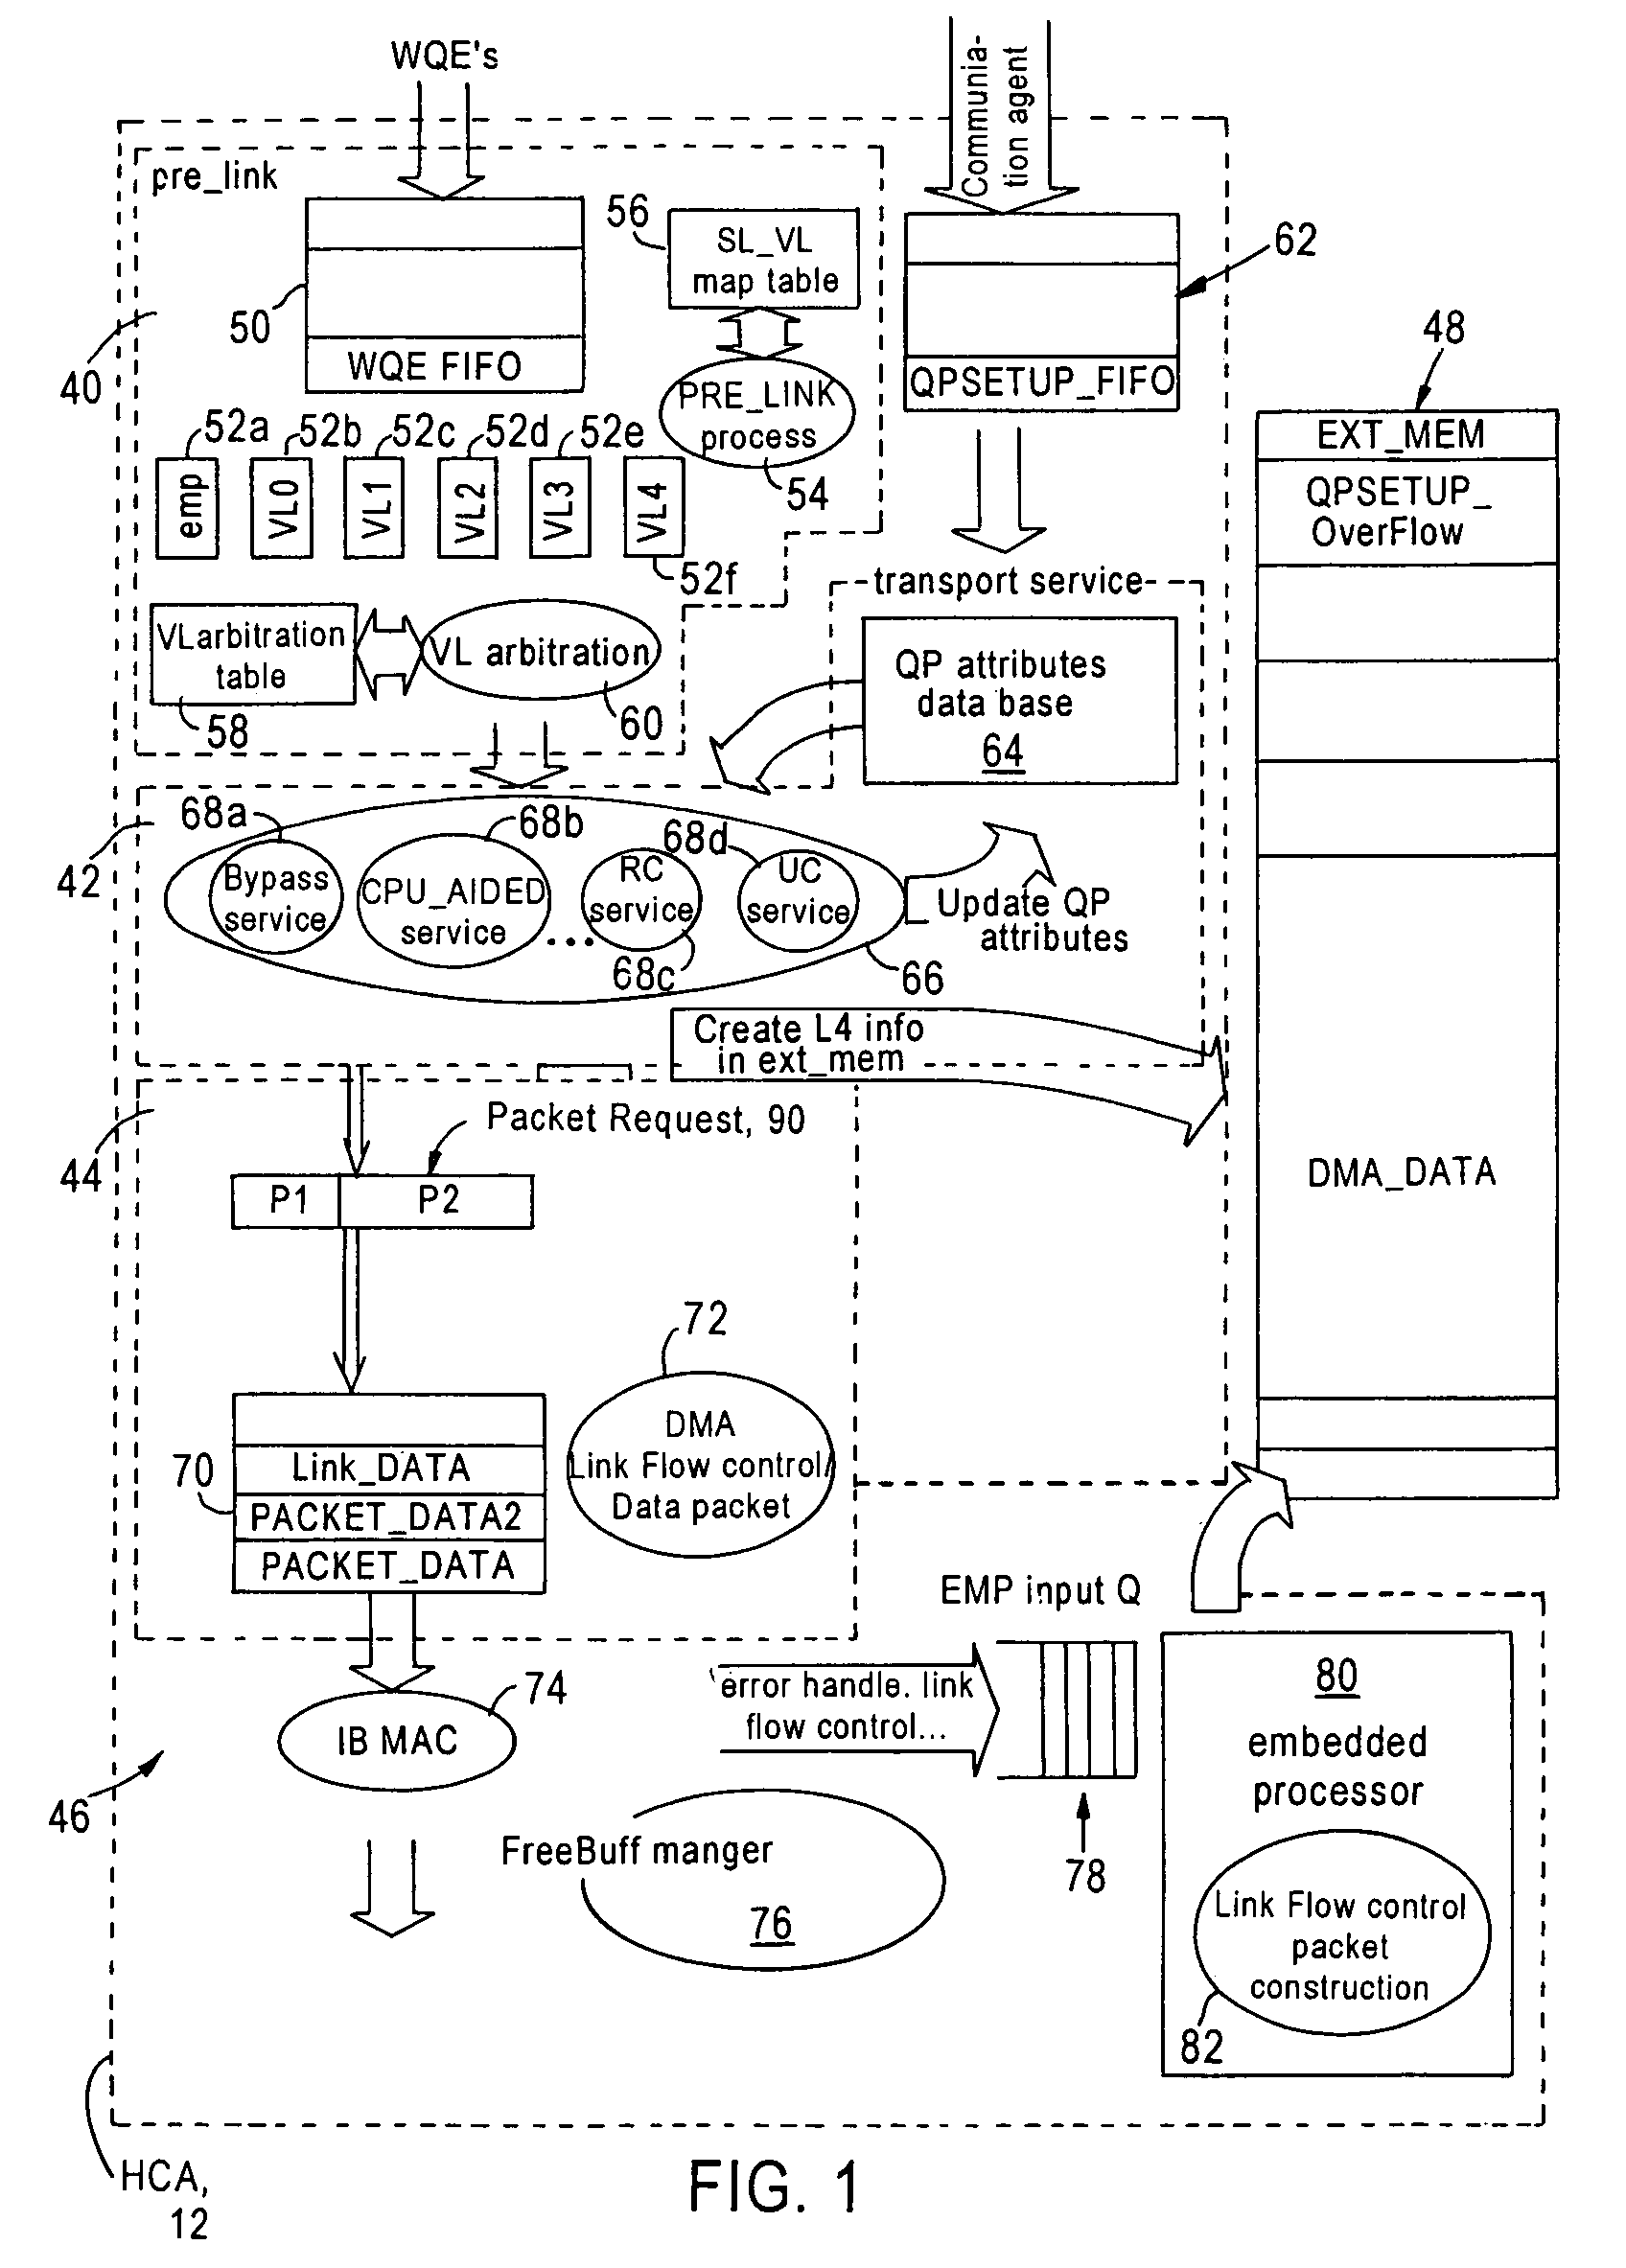 Arrangement in an infiniband channel adapter for sharing memory space for work queue entries using multiply-linked lists